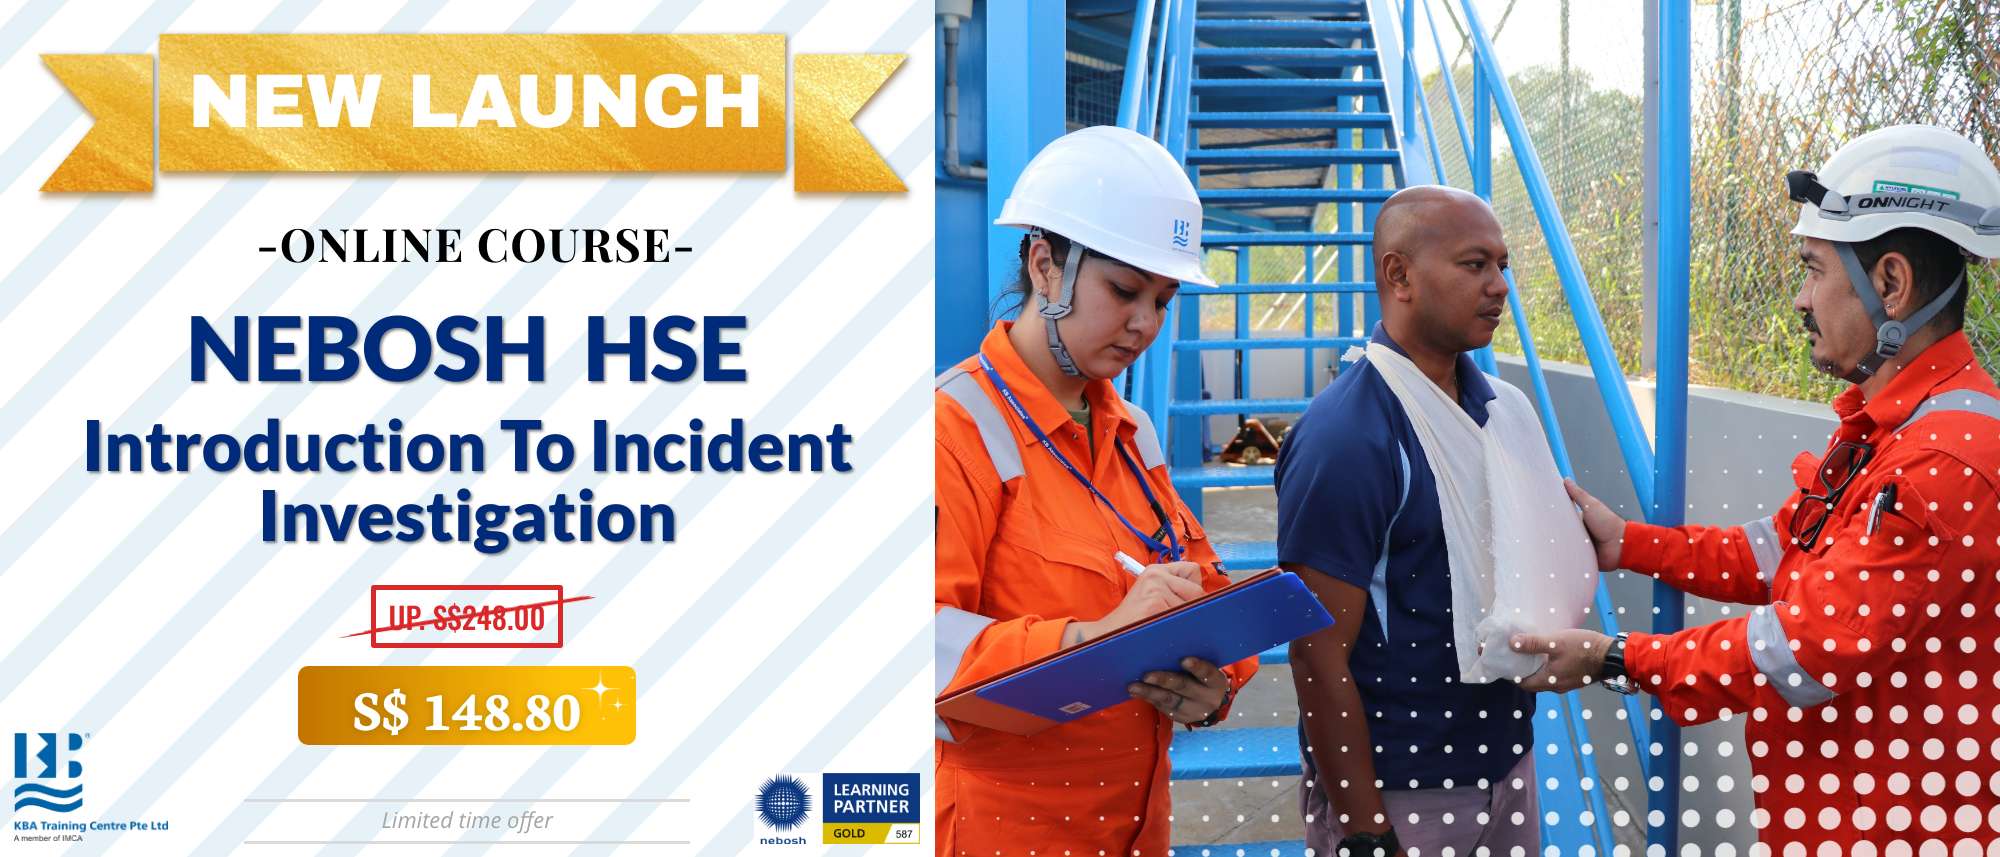 ONLINE COURSE - NEBOSH HSE Introduction To Incident Investigation